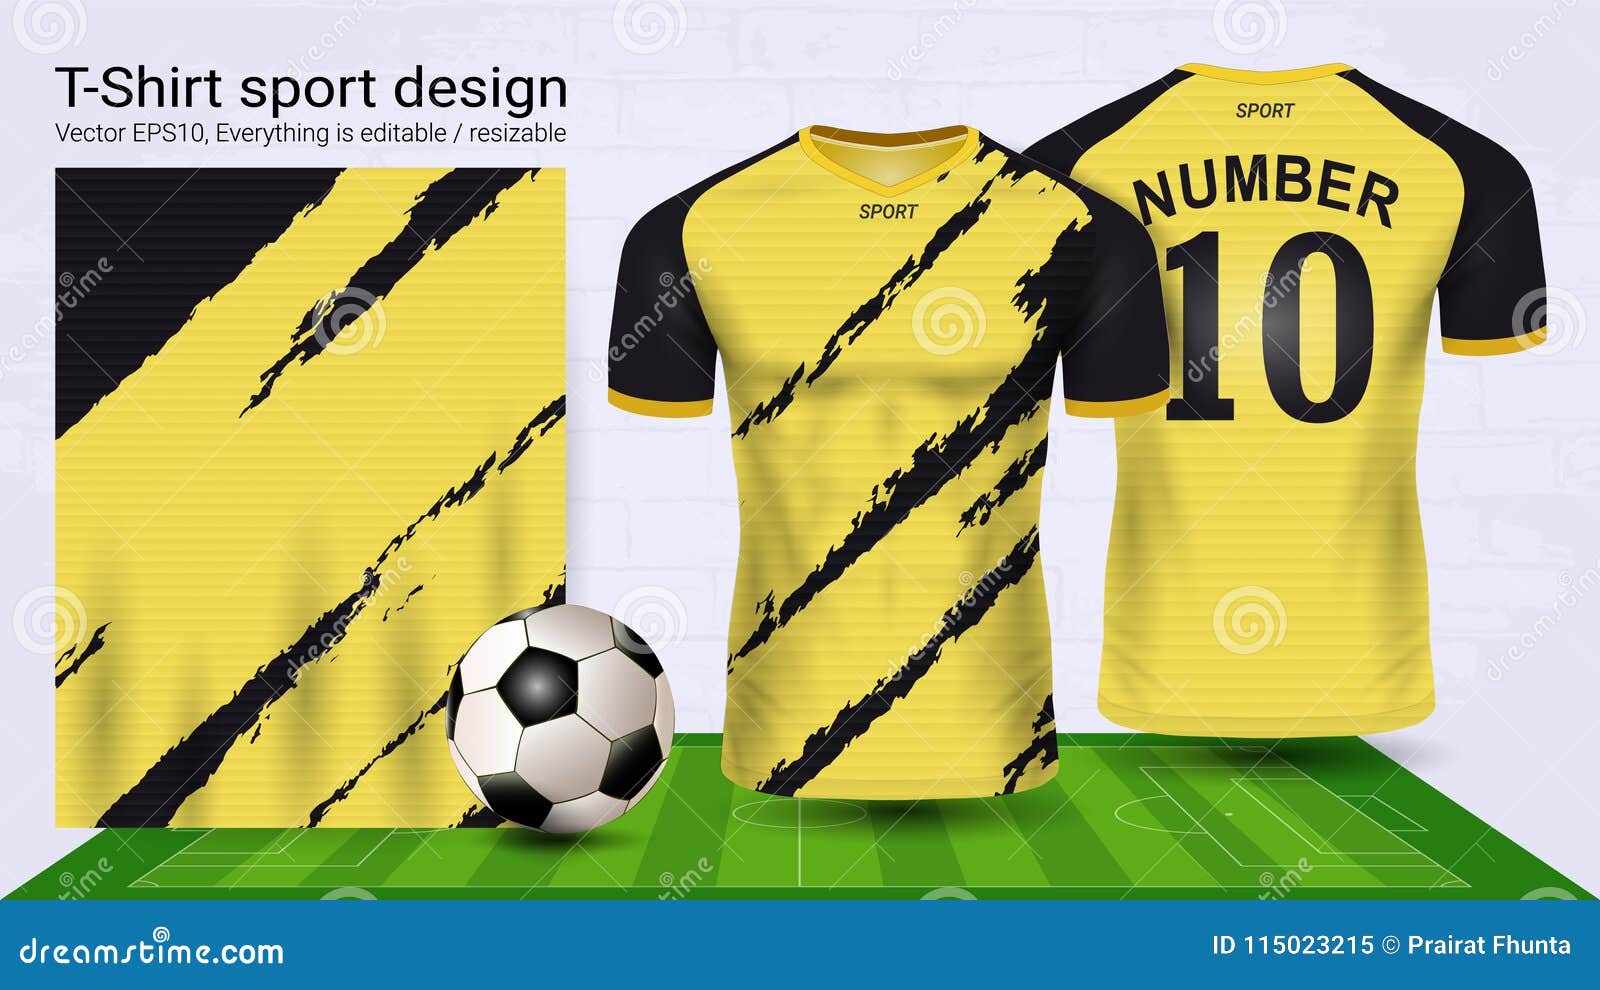 Download T Shirt Soccer Mockup Free Nike Soccer T Shirt Mockup Psd Inside Psd You Can Change The Color Of Collar Area Shoulders Artwork Already Placed Stripes Color Under Armpits Stripes Change The